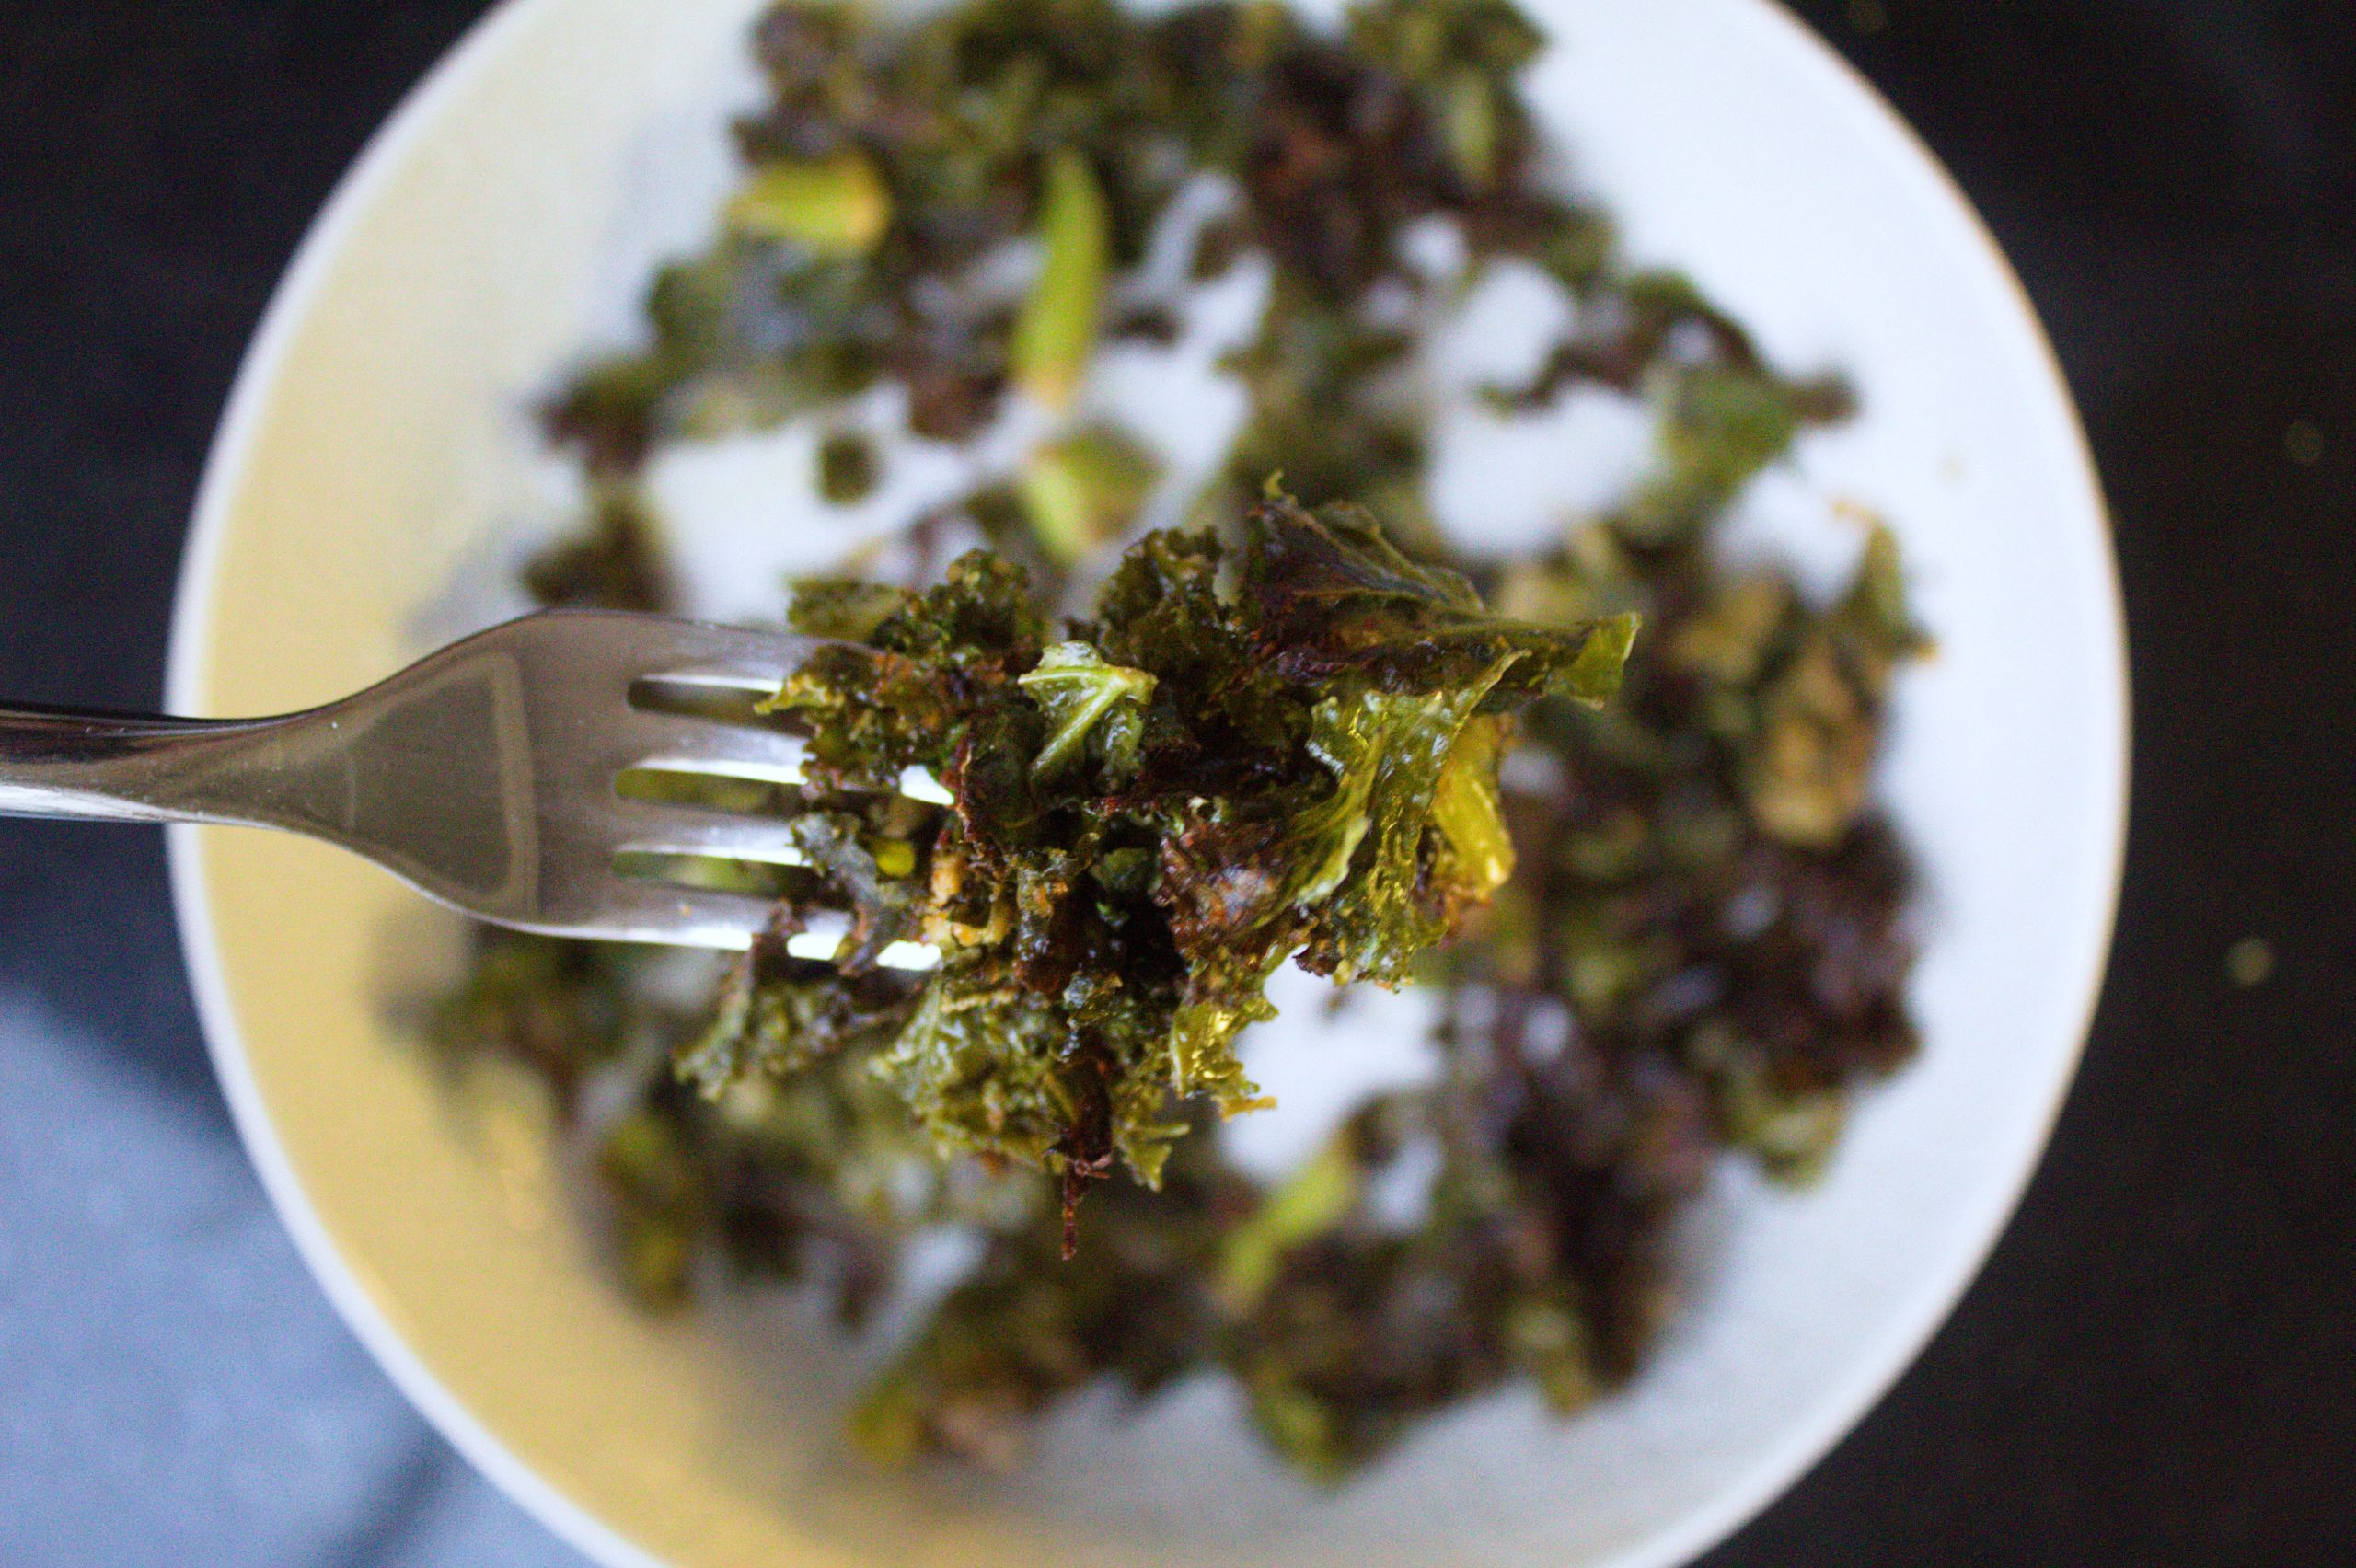 You are currently viewing “Cheesy” Vegan Kale Crisps | How To Massage Kale